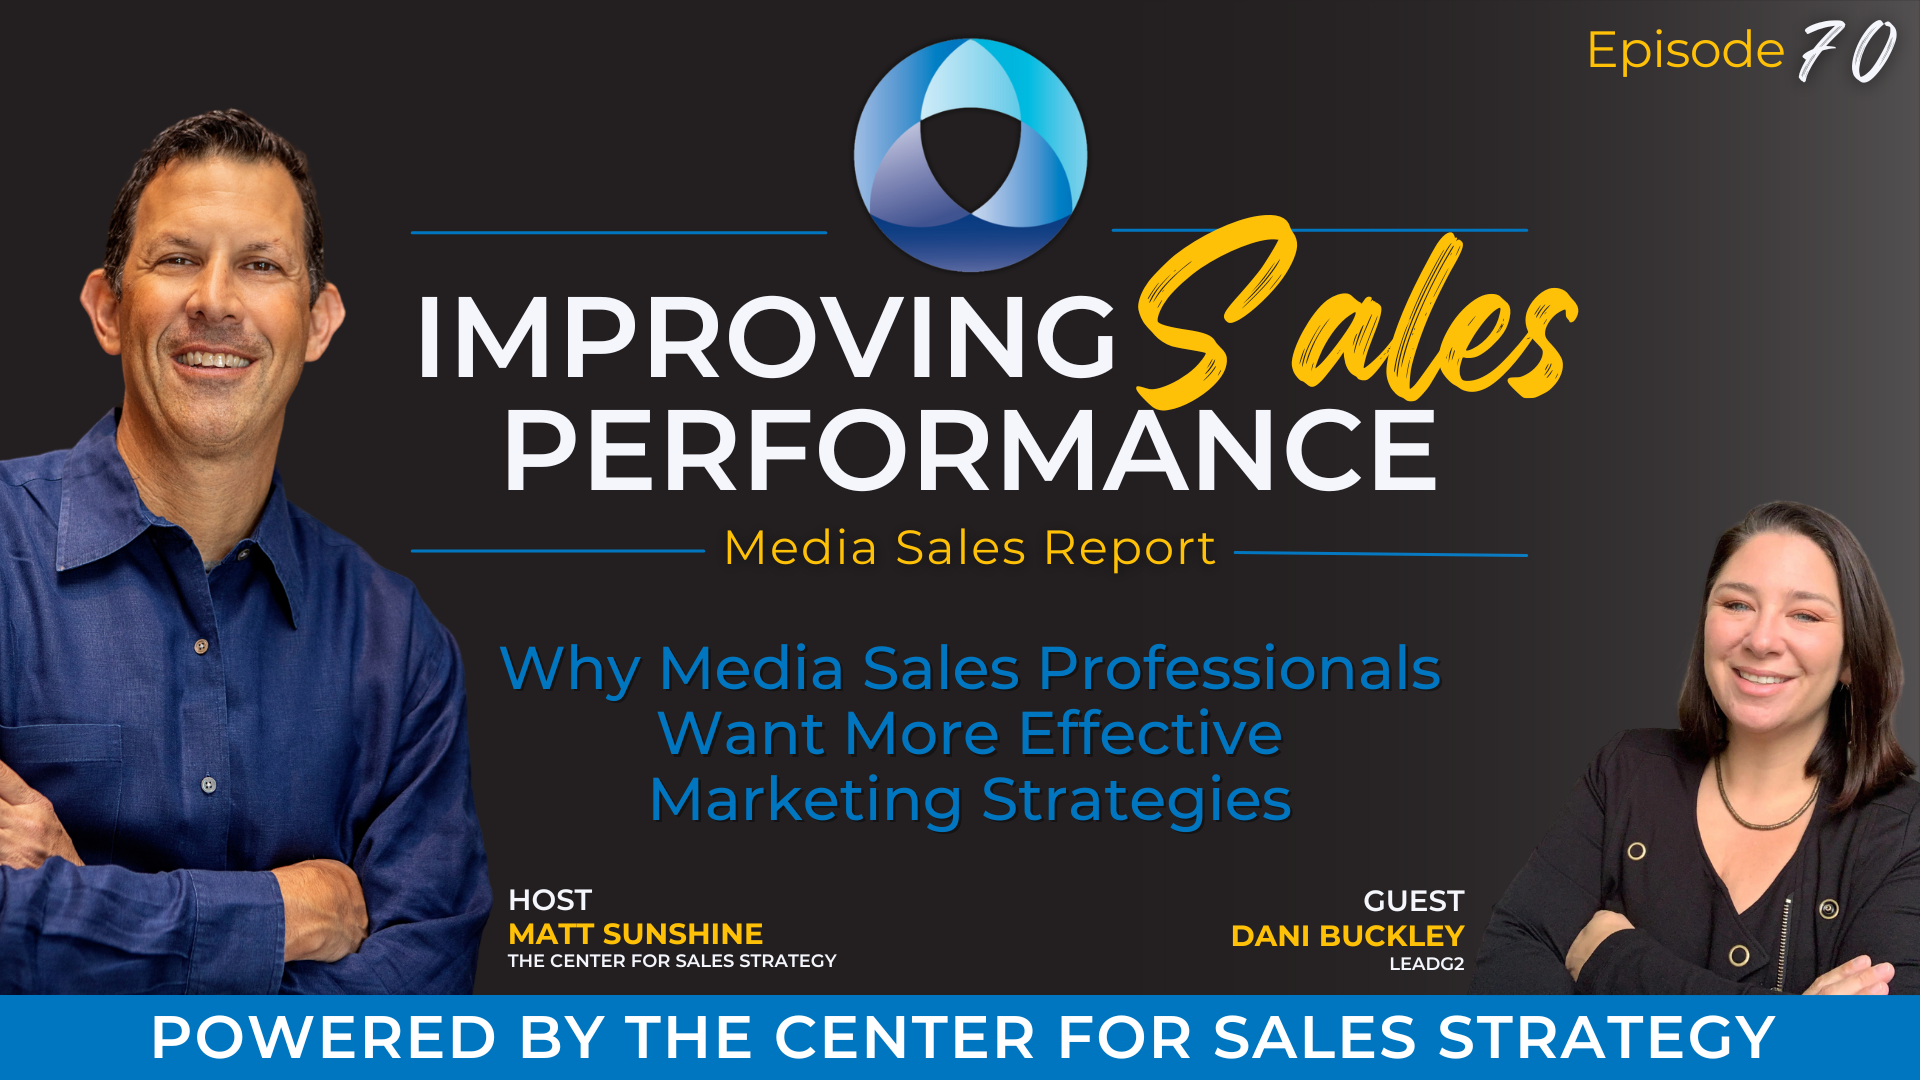 Why Media Sales Professionals Want More Effective Marketing Strategies with Dani Buckley